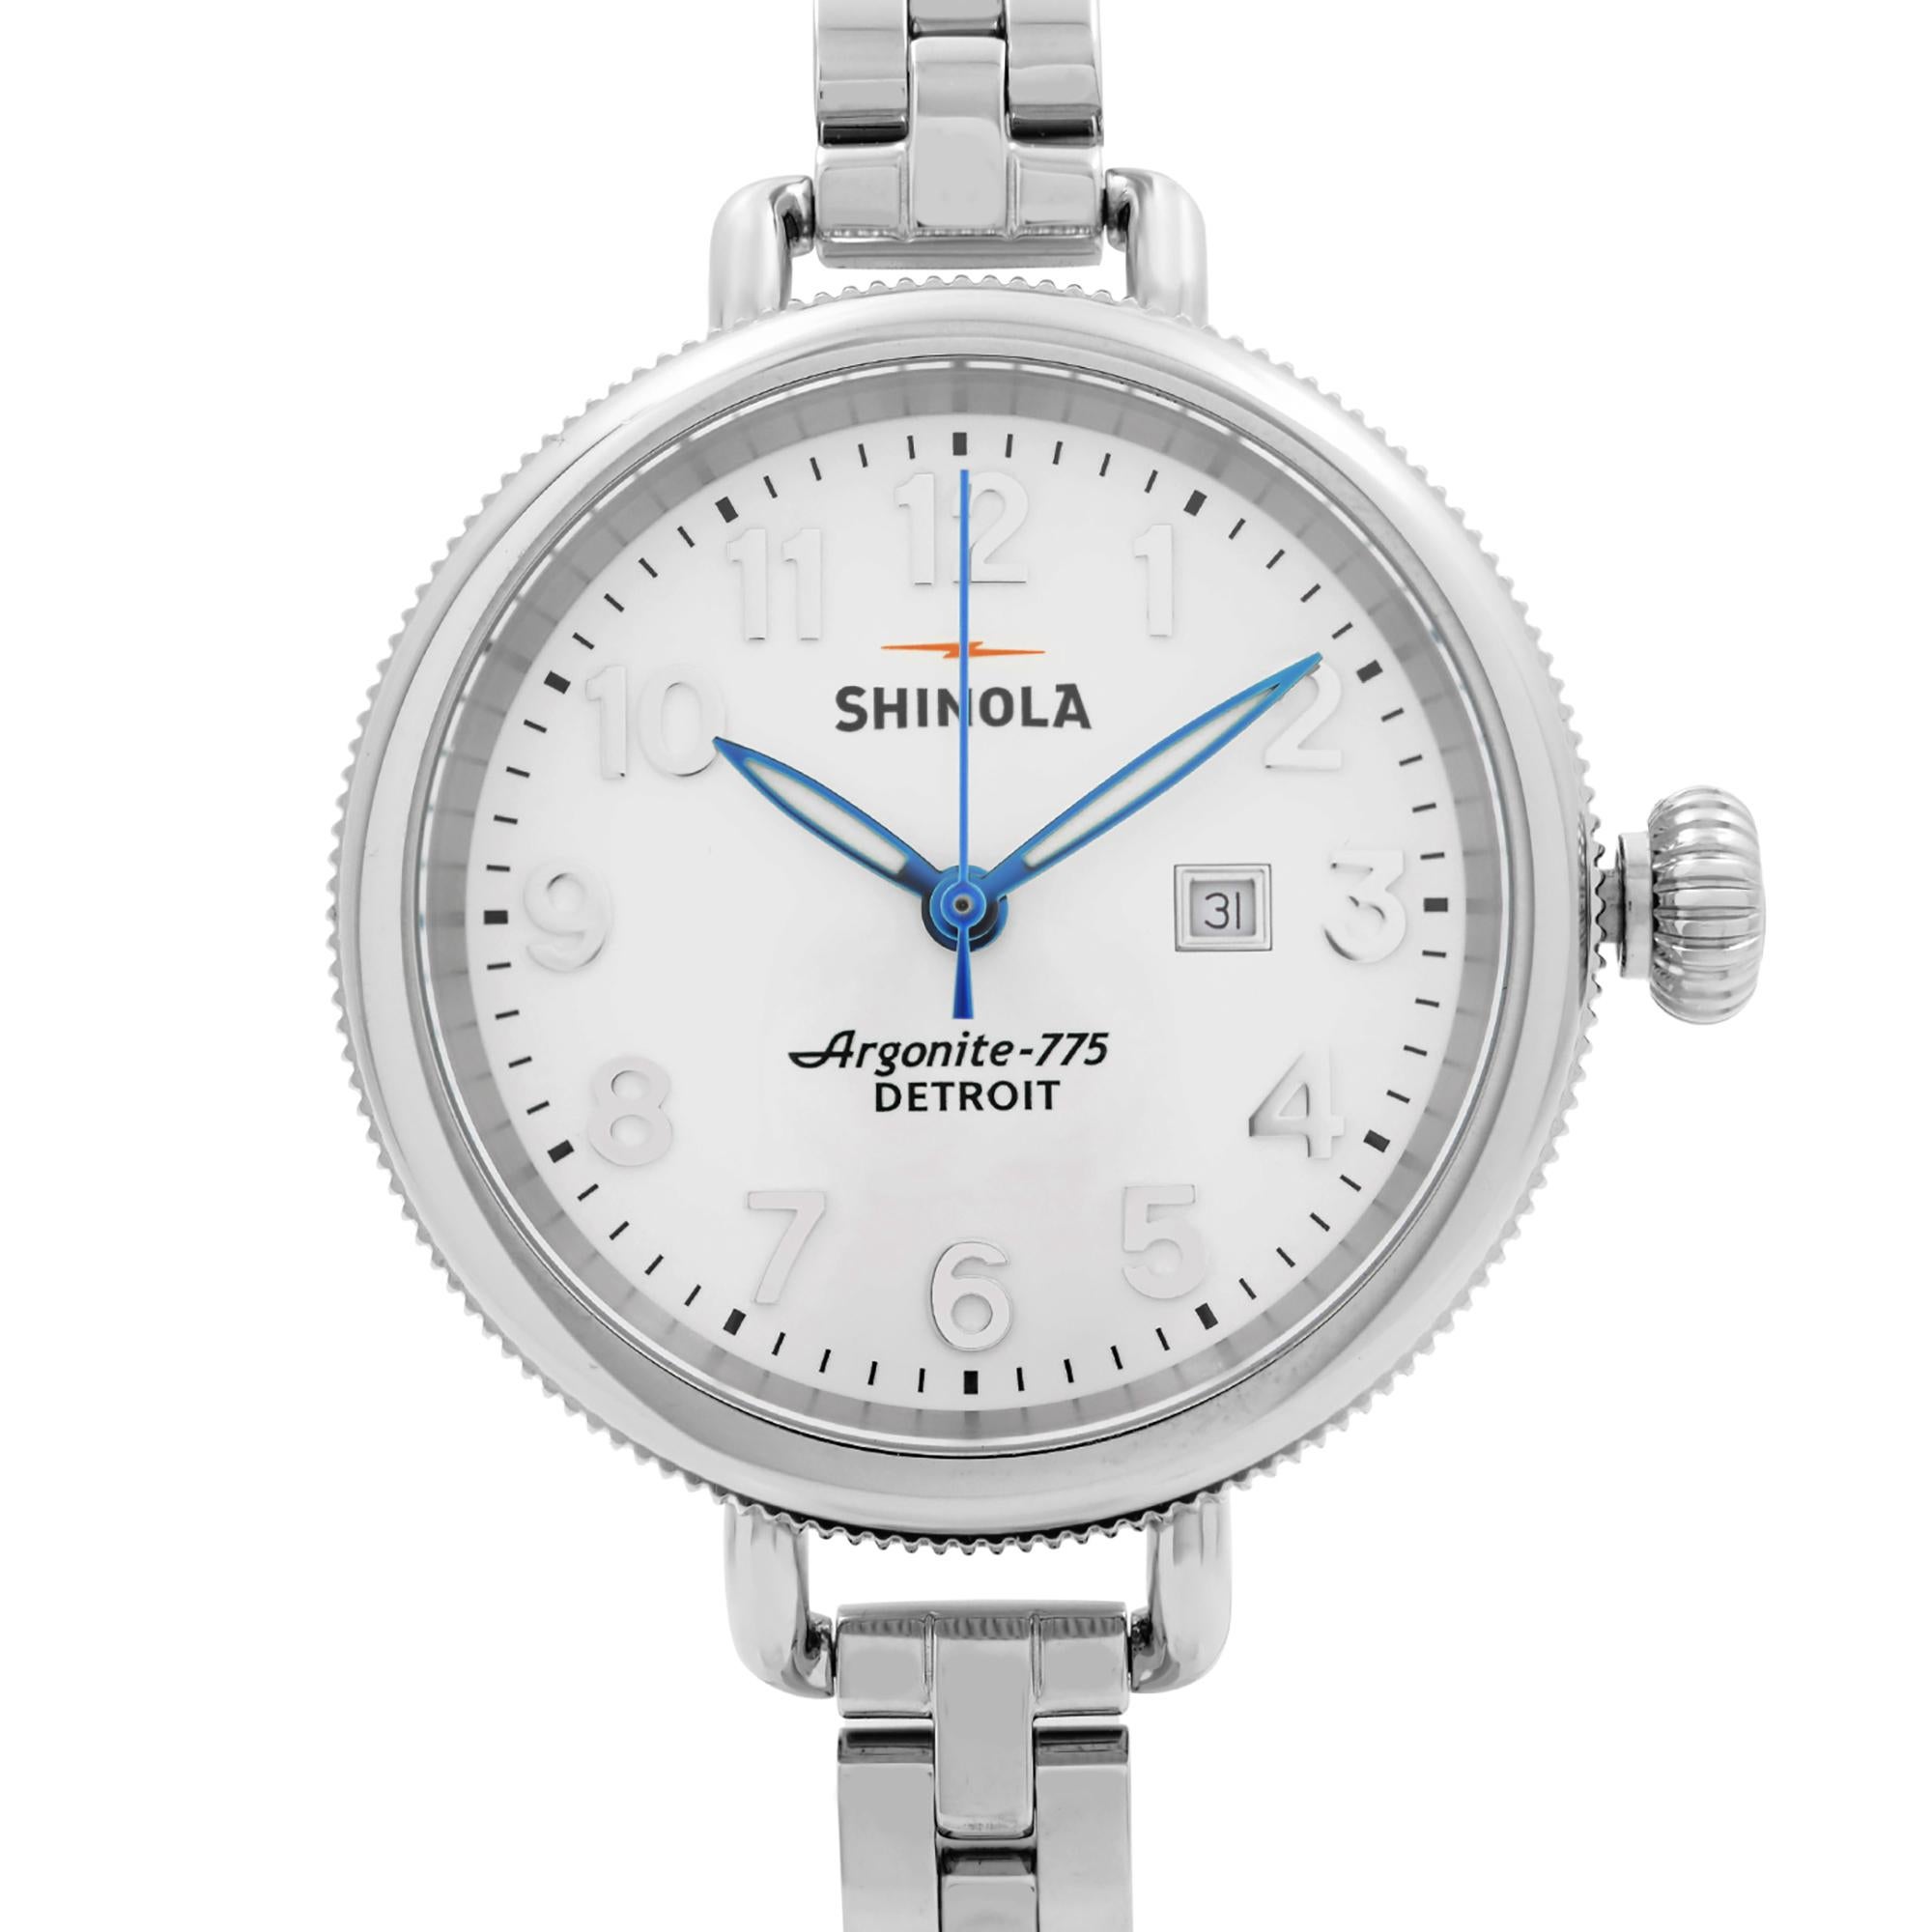 Store Display Model  Shinola The Birdy Watch is a beautiful Ladie's timepiece that is powered by quartz (battery) movement which is cased in a stainless steel case. It has a round shape face, a date indicator dial, and has hand Arabic numerals style